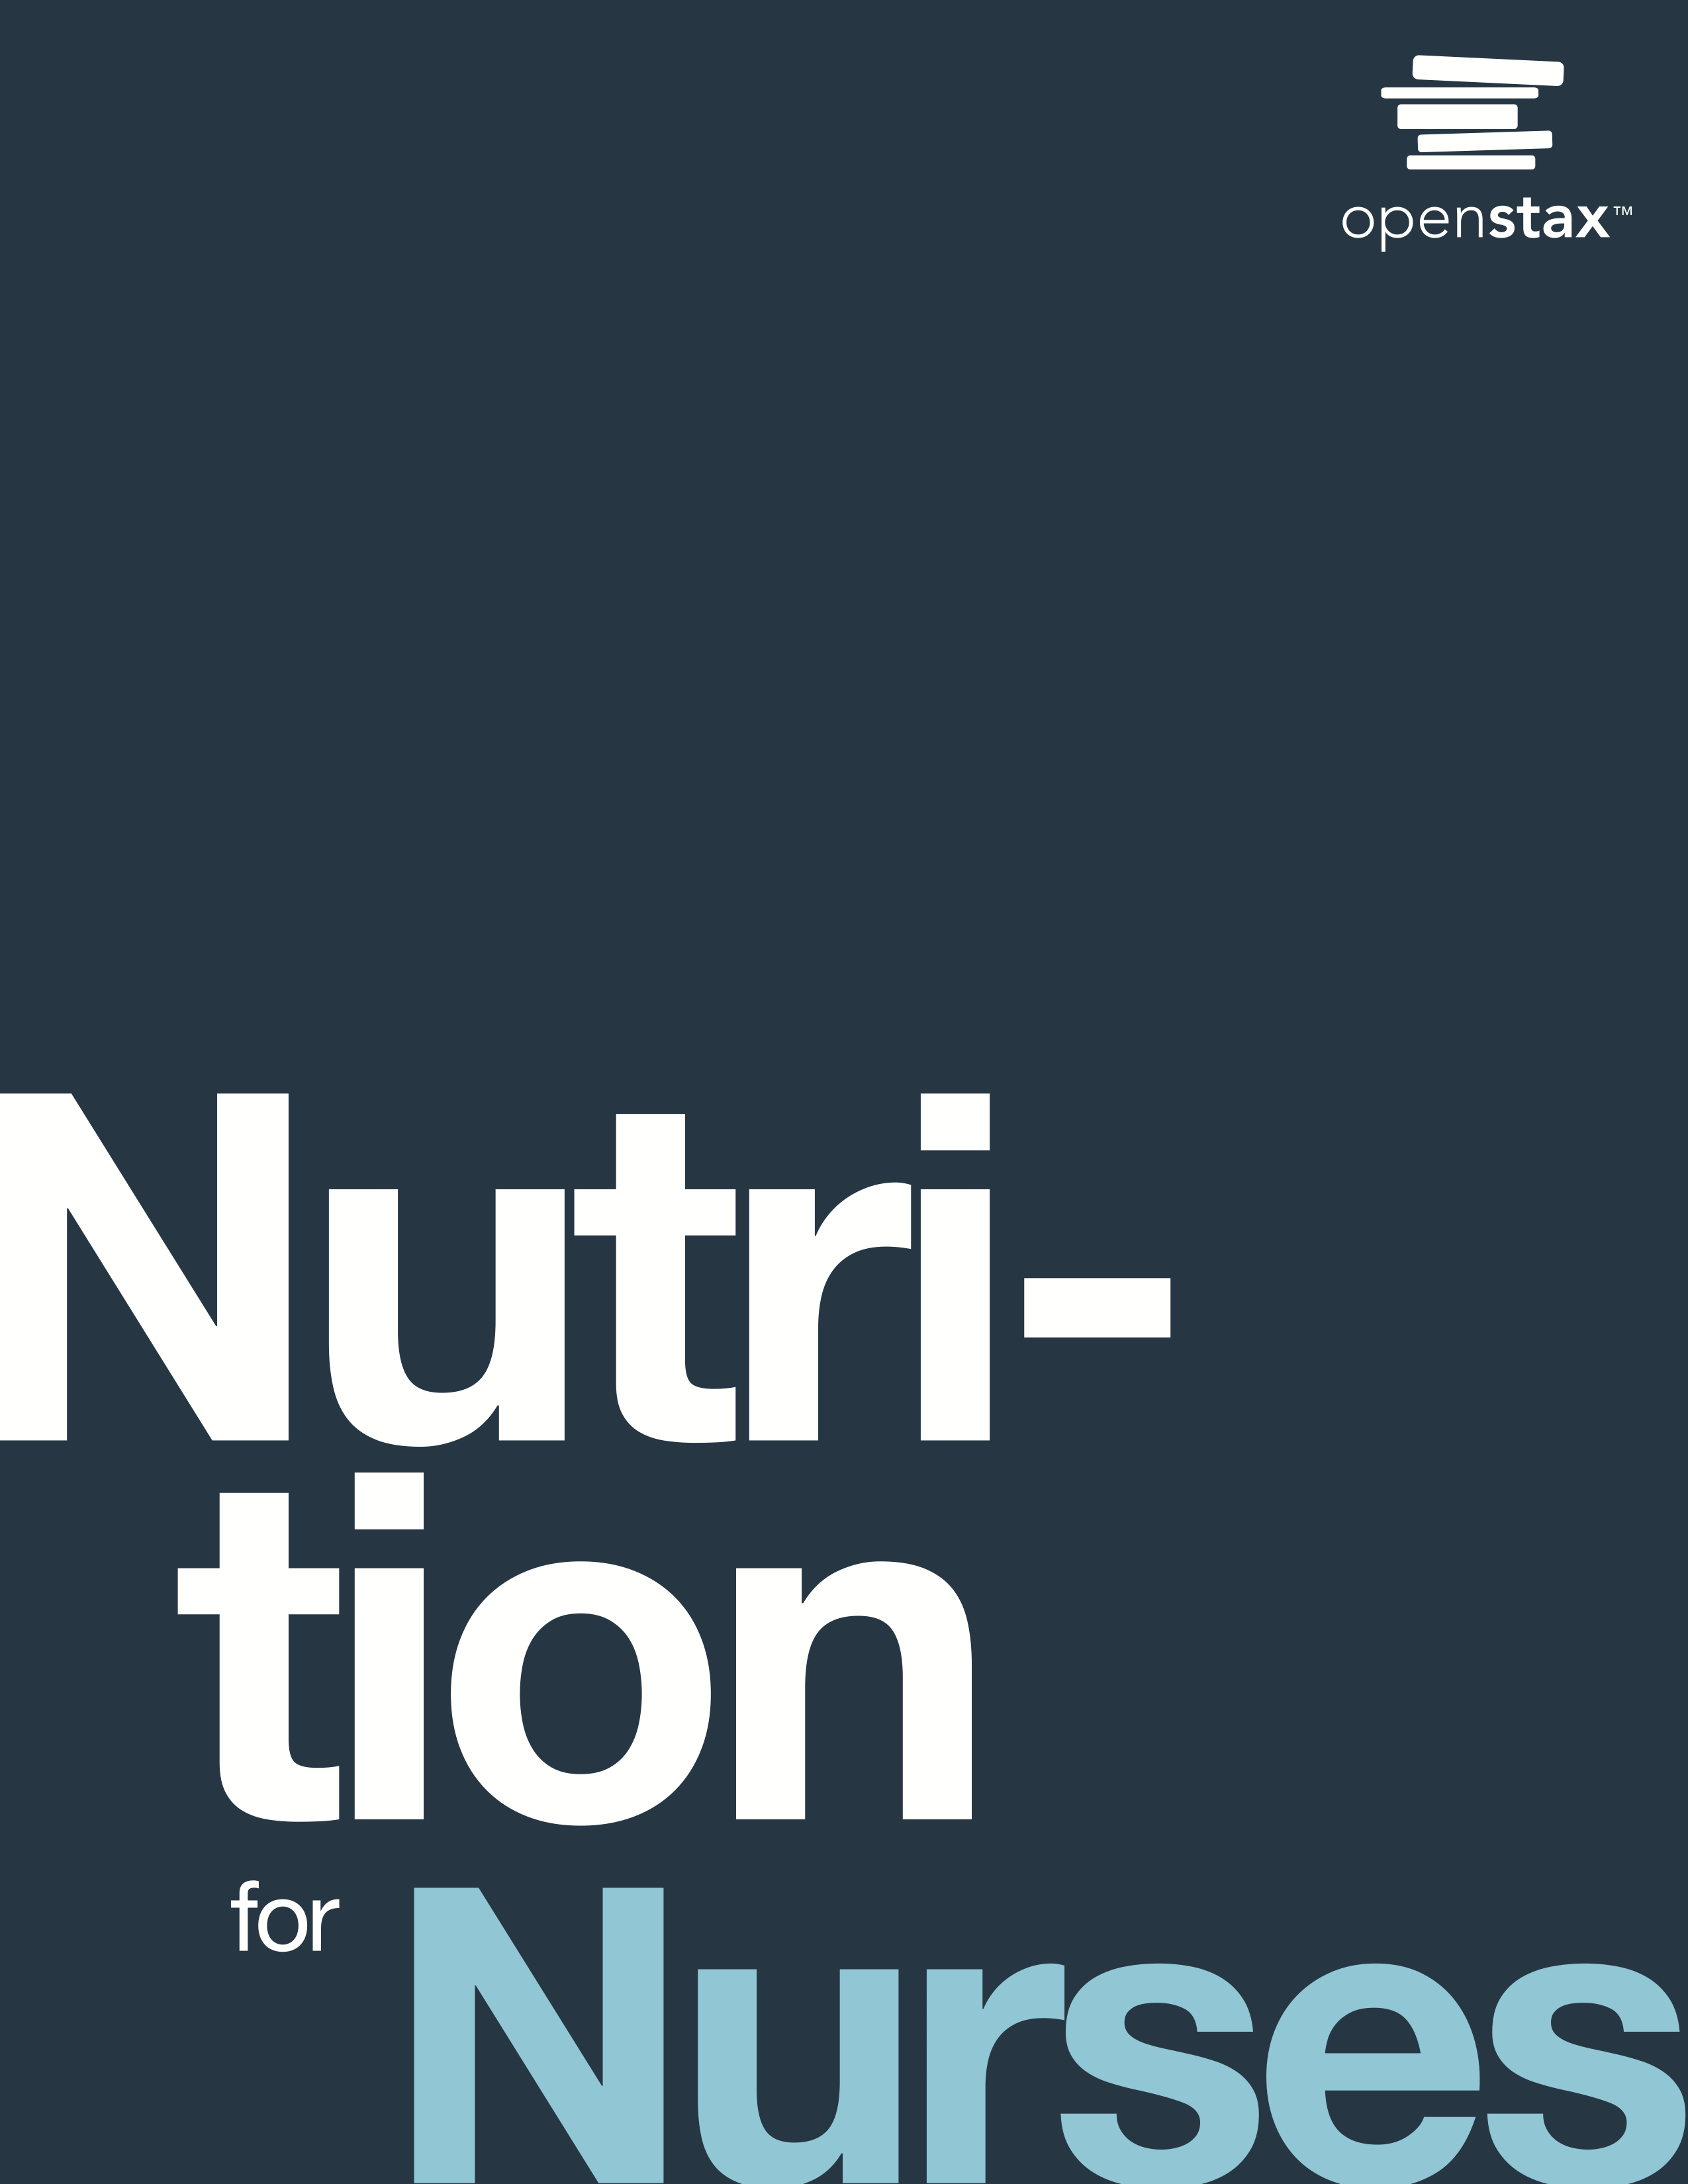 OpenStax Textbook Cover: White and yellow text on navy blue background. Text: Nutrition for Nurses